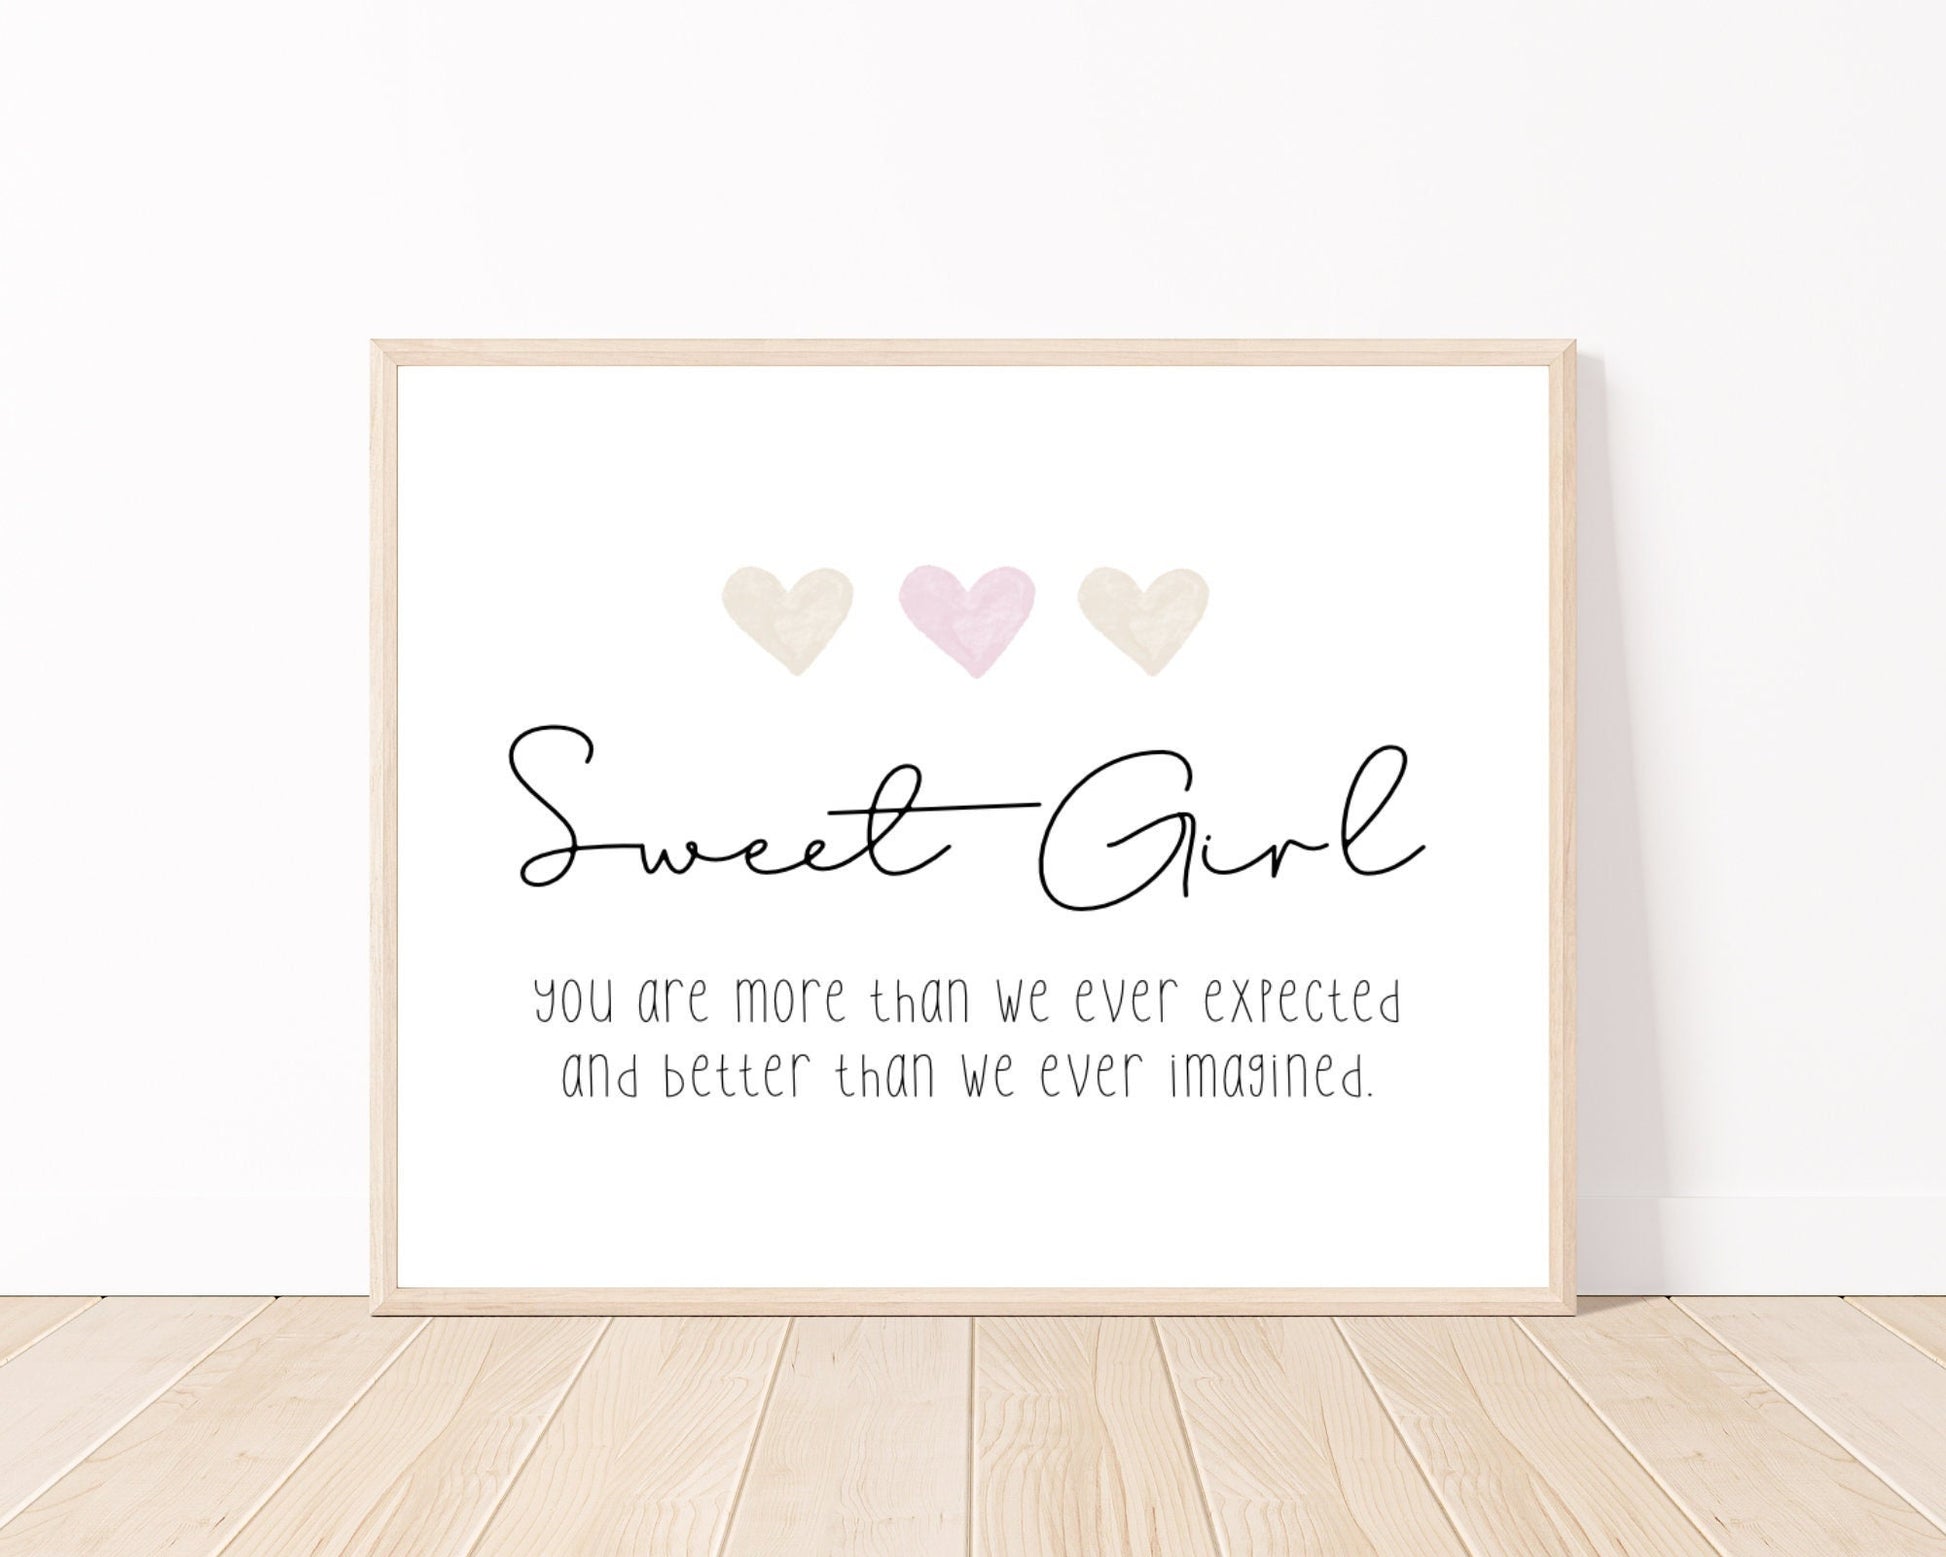 A little girl’s room digital print placed on a white wall and parquet flooring that has three hearts at the top, and a piece of writing that says: “Sweet girl, you are more than we ever expected and better than we ever imagined.”